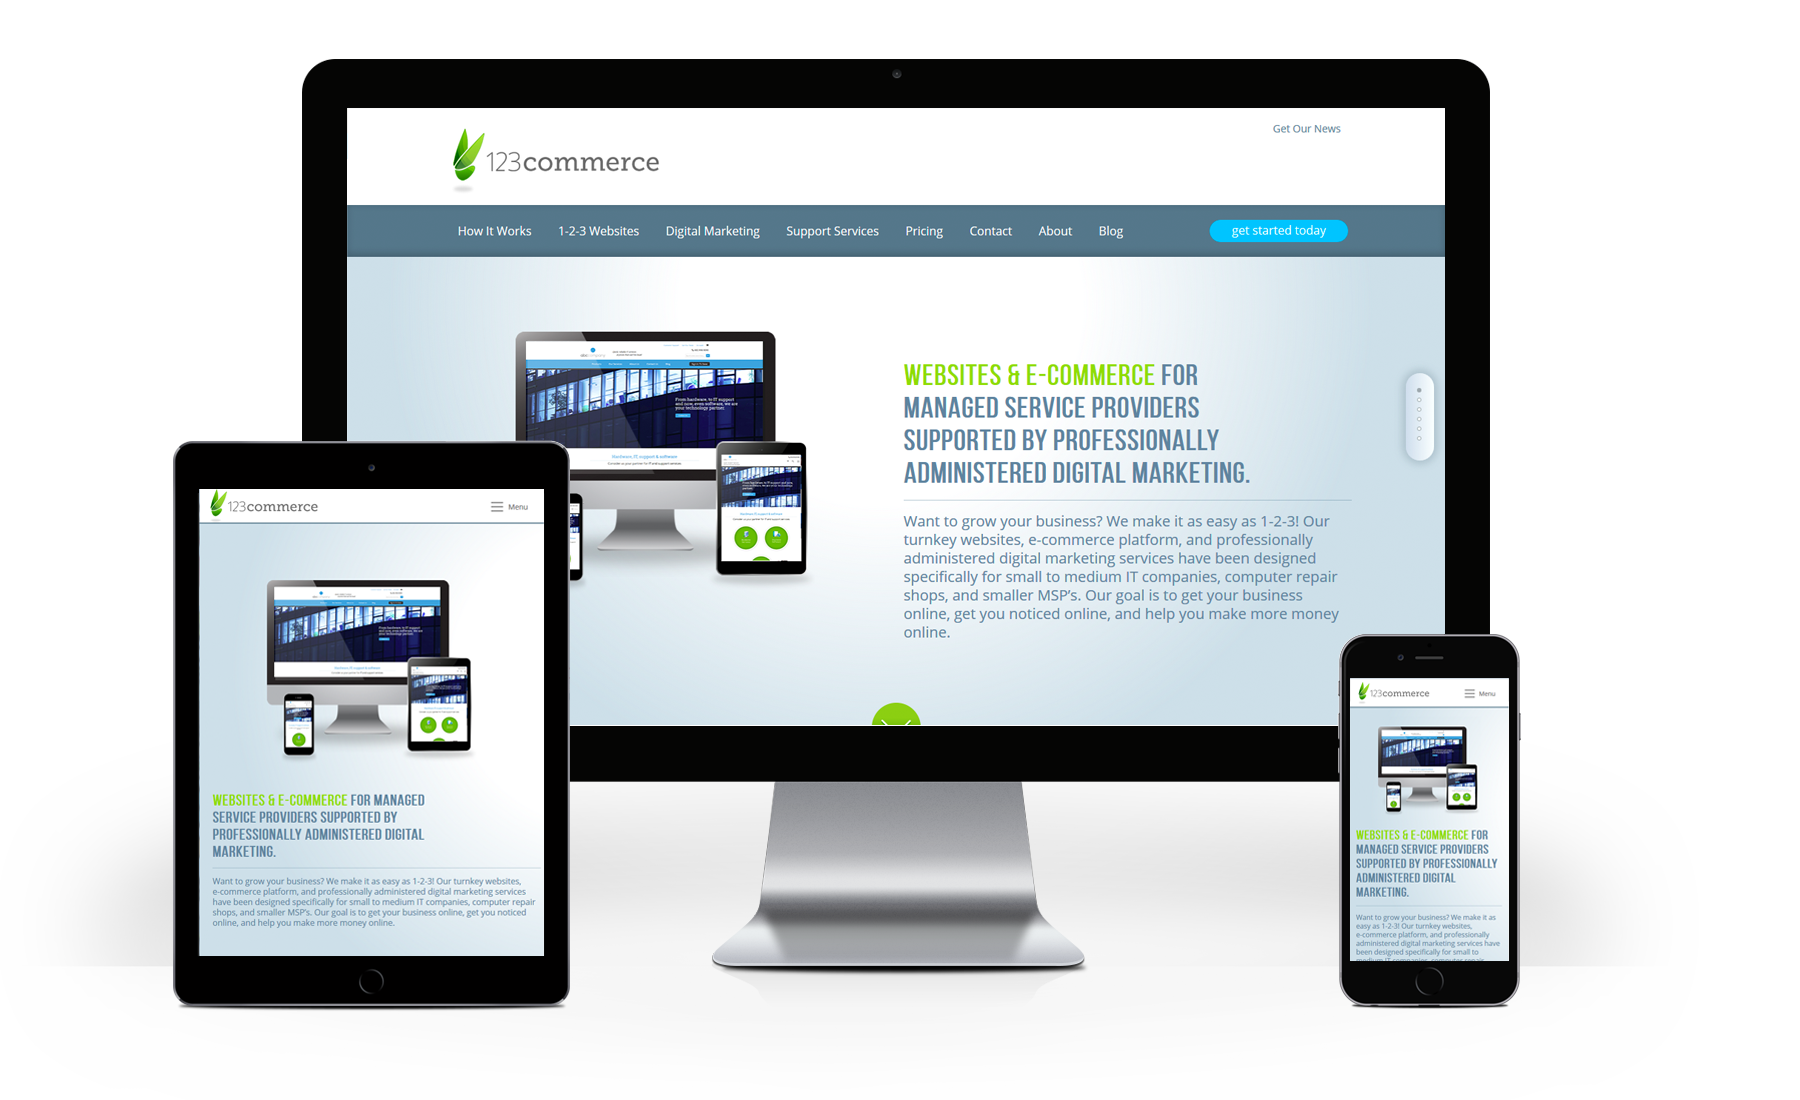 Desktop, tablet, and mobile views of the 123Commerce homepage